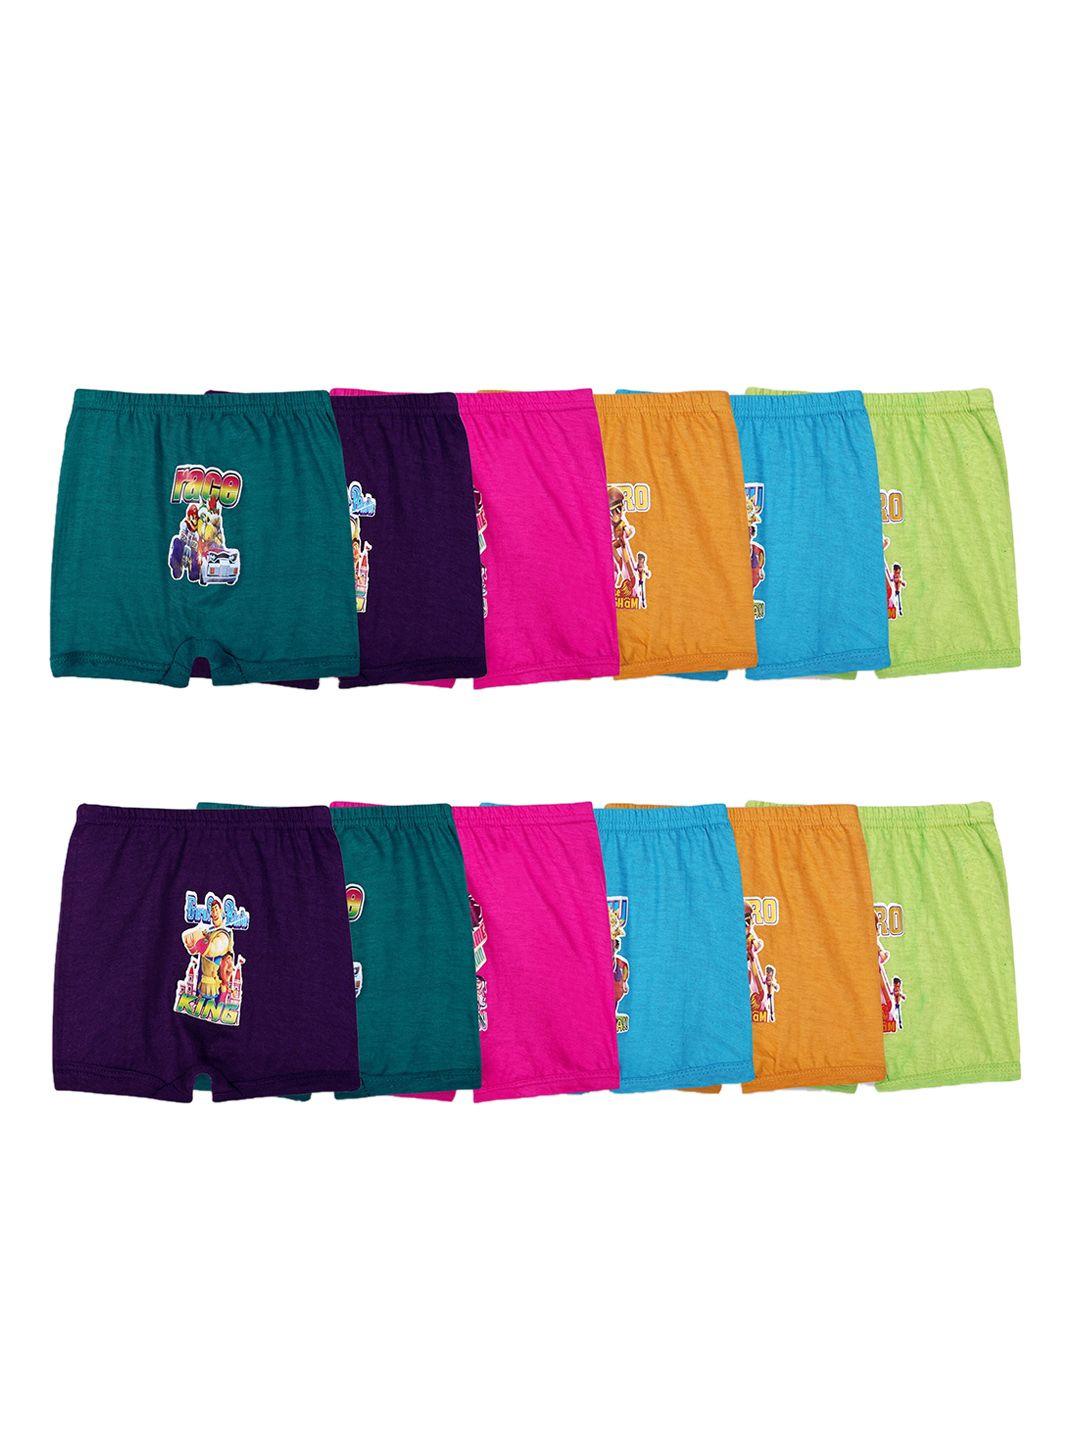 baesd kids pack of 12 printed pure cotton briefs 20_dra_po-12